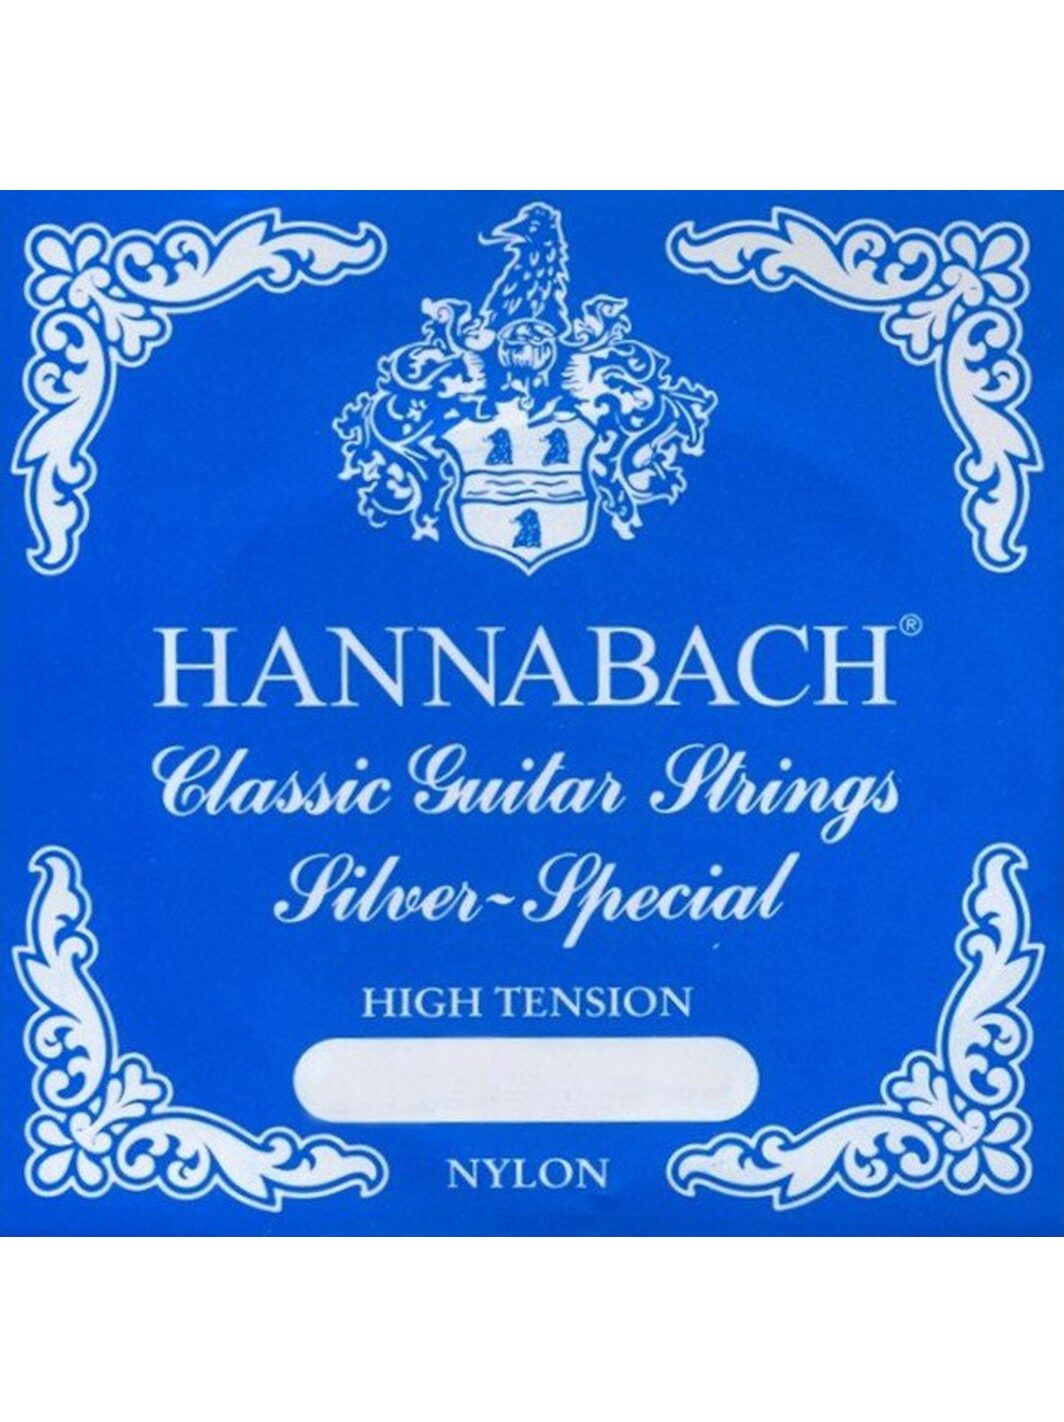 Hannabach 815 HT Silver Special High Tension